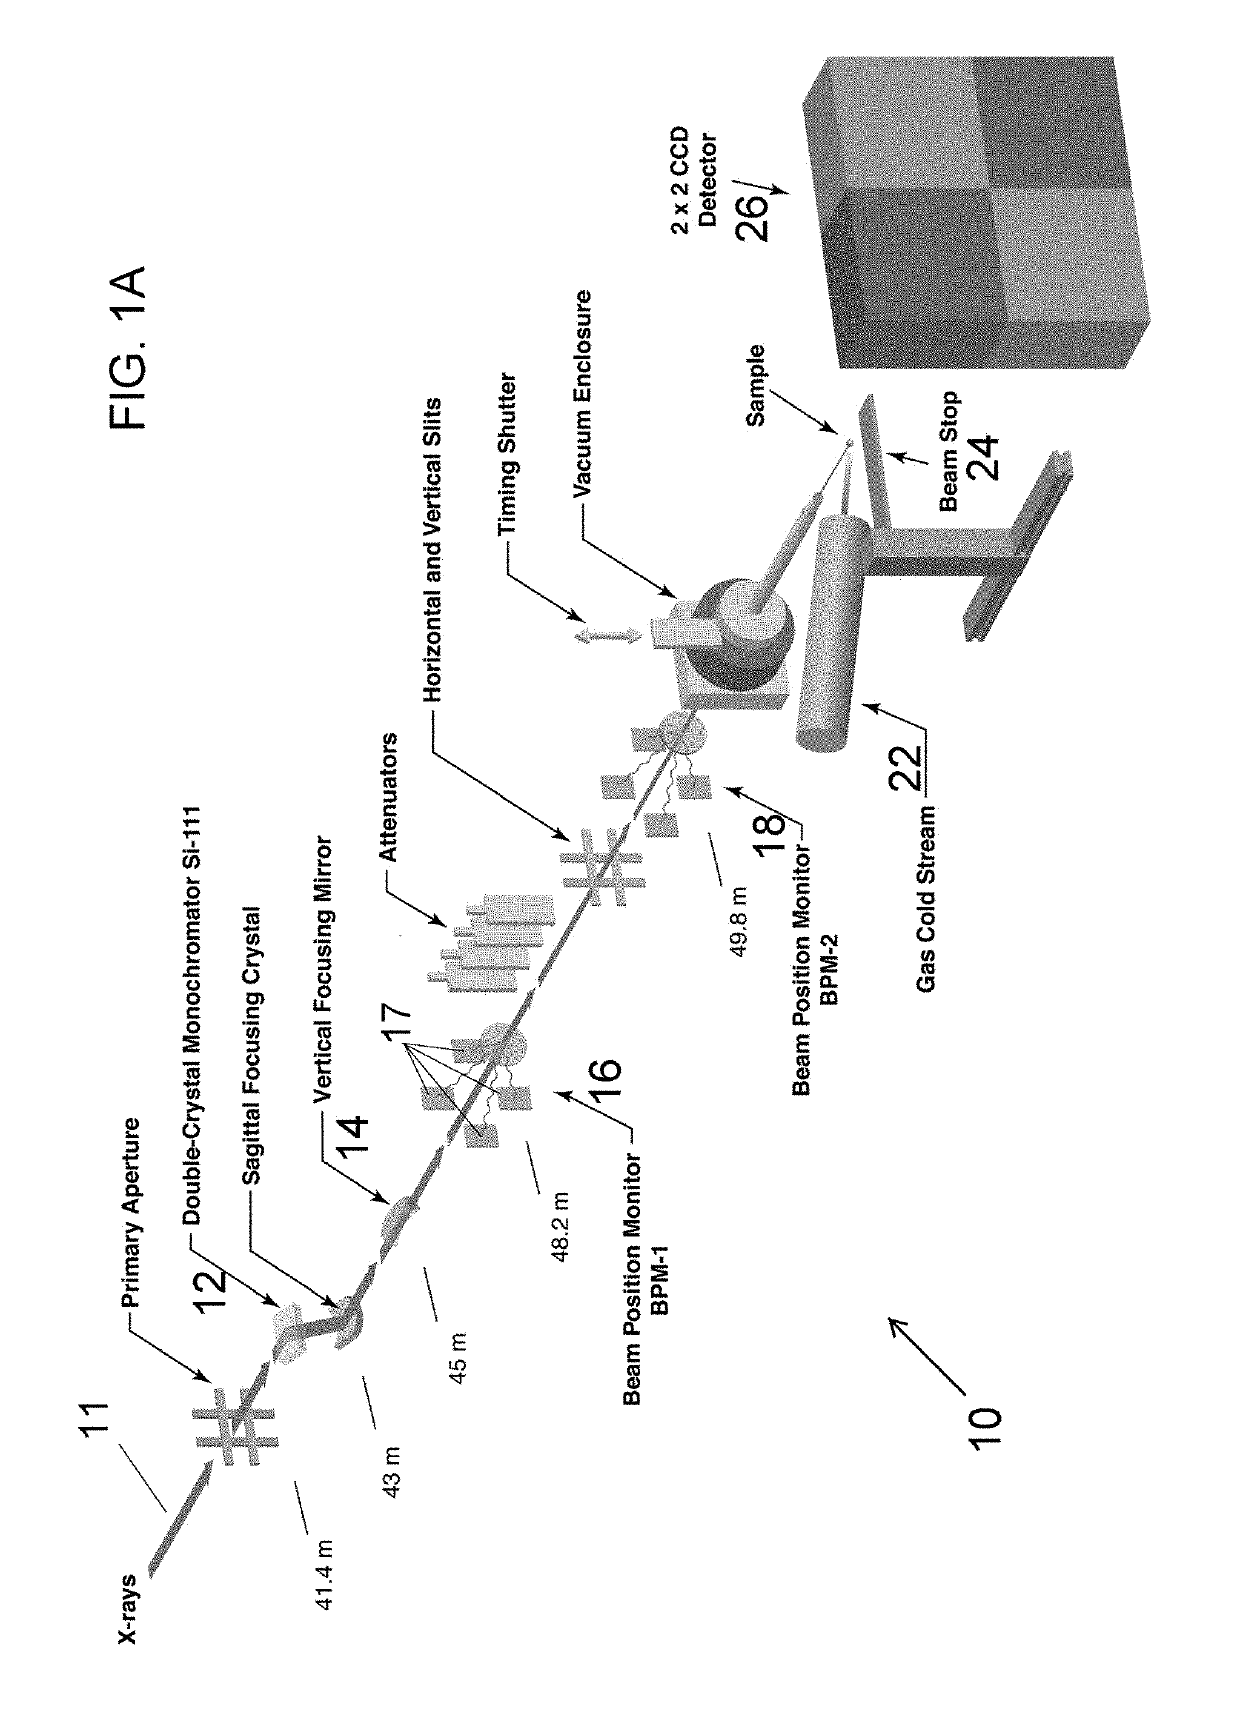 Bi-metal foil for a beam intensity/position monitor, method for determining mass absorption coefficients